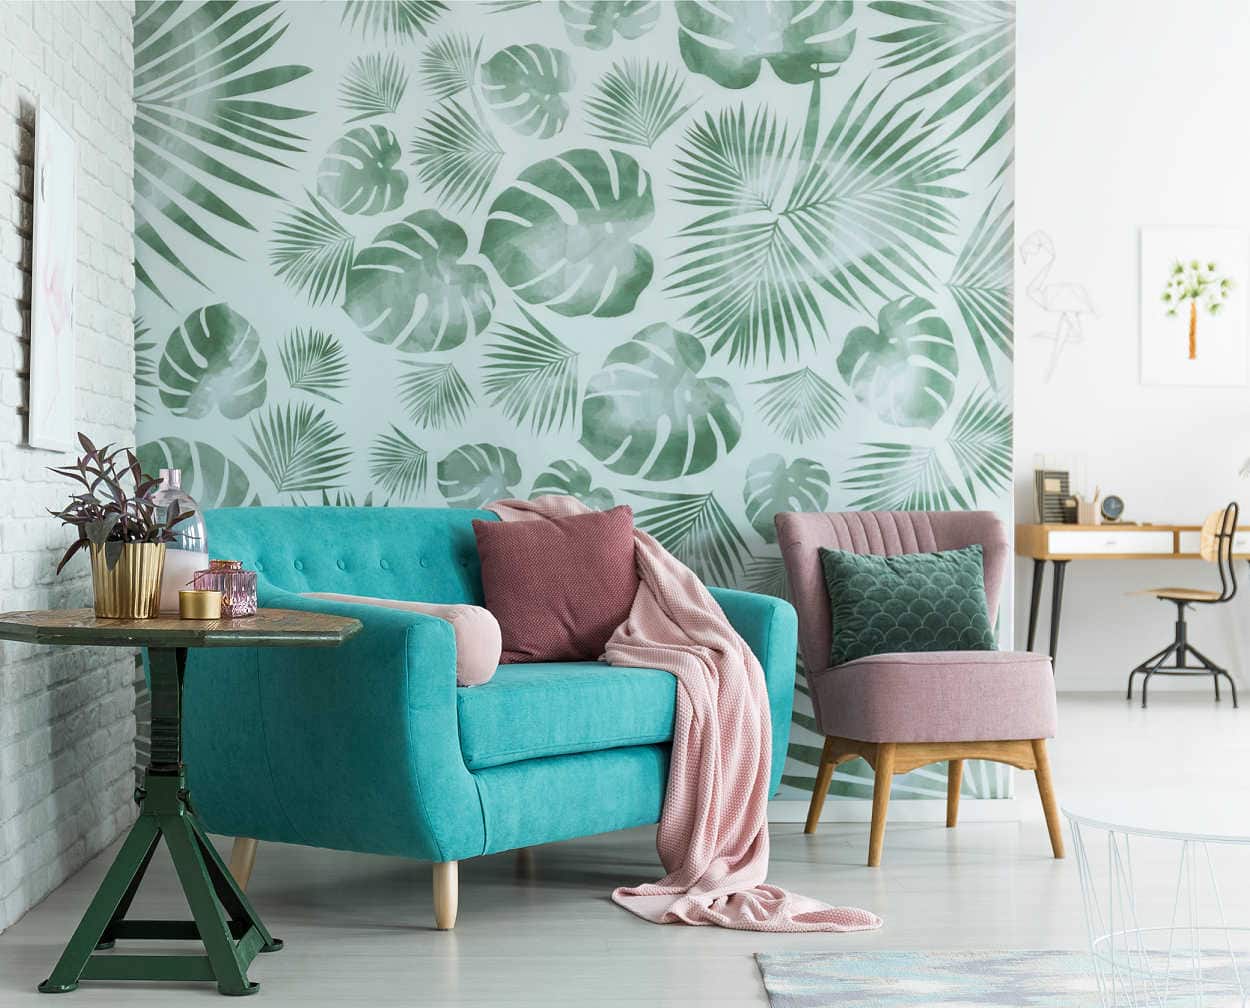 The Persevering Popularity of Flower Wallpaper